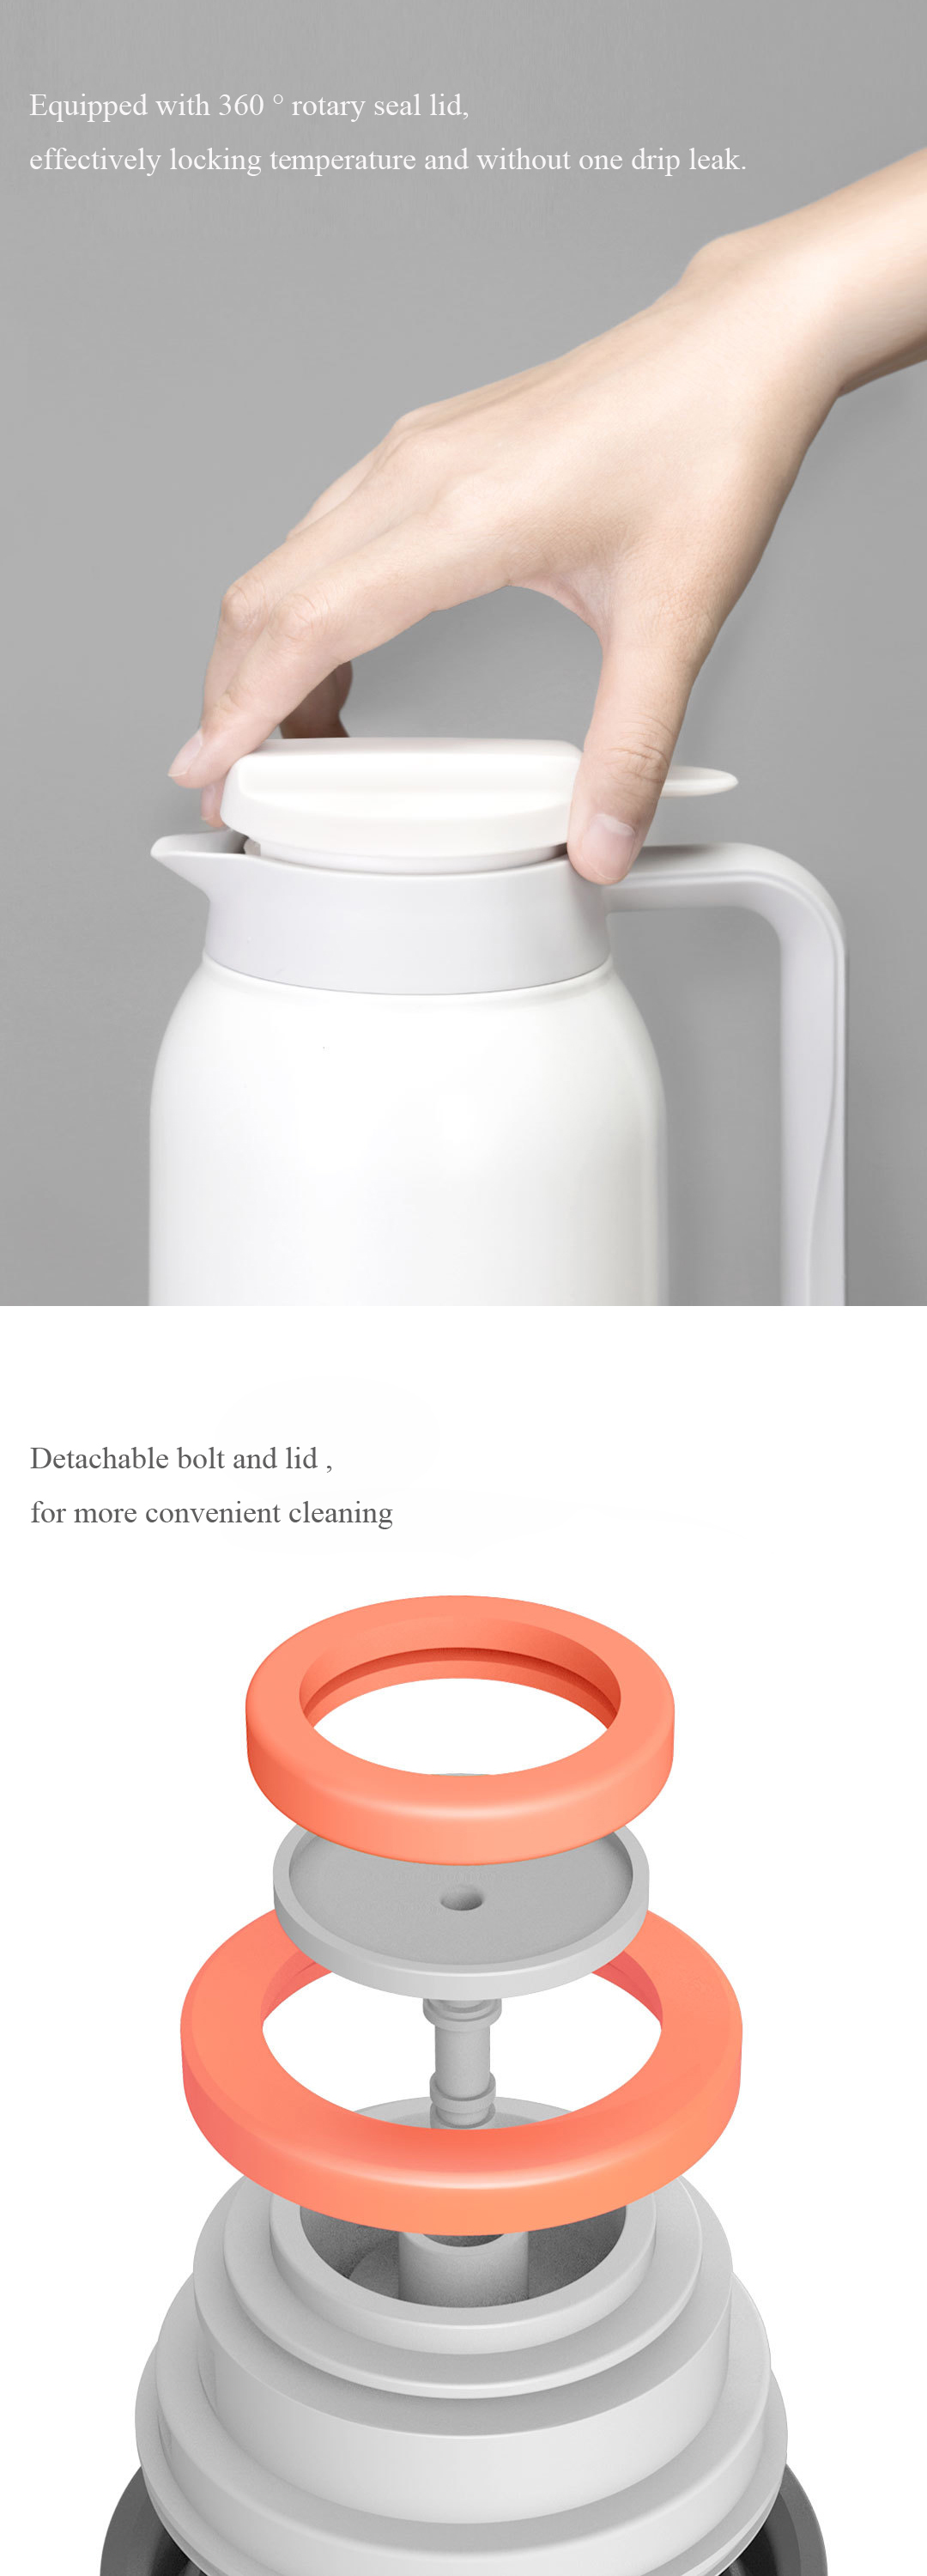 Xiaomi 24 Hours Long-lasting Insulation Vacuum Pot 1500ML Stainless Steel Water Bottle